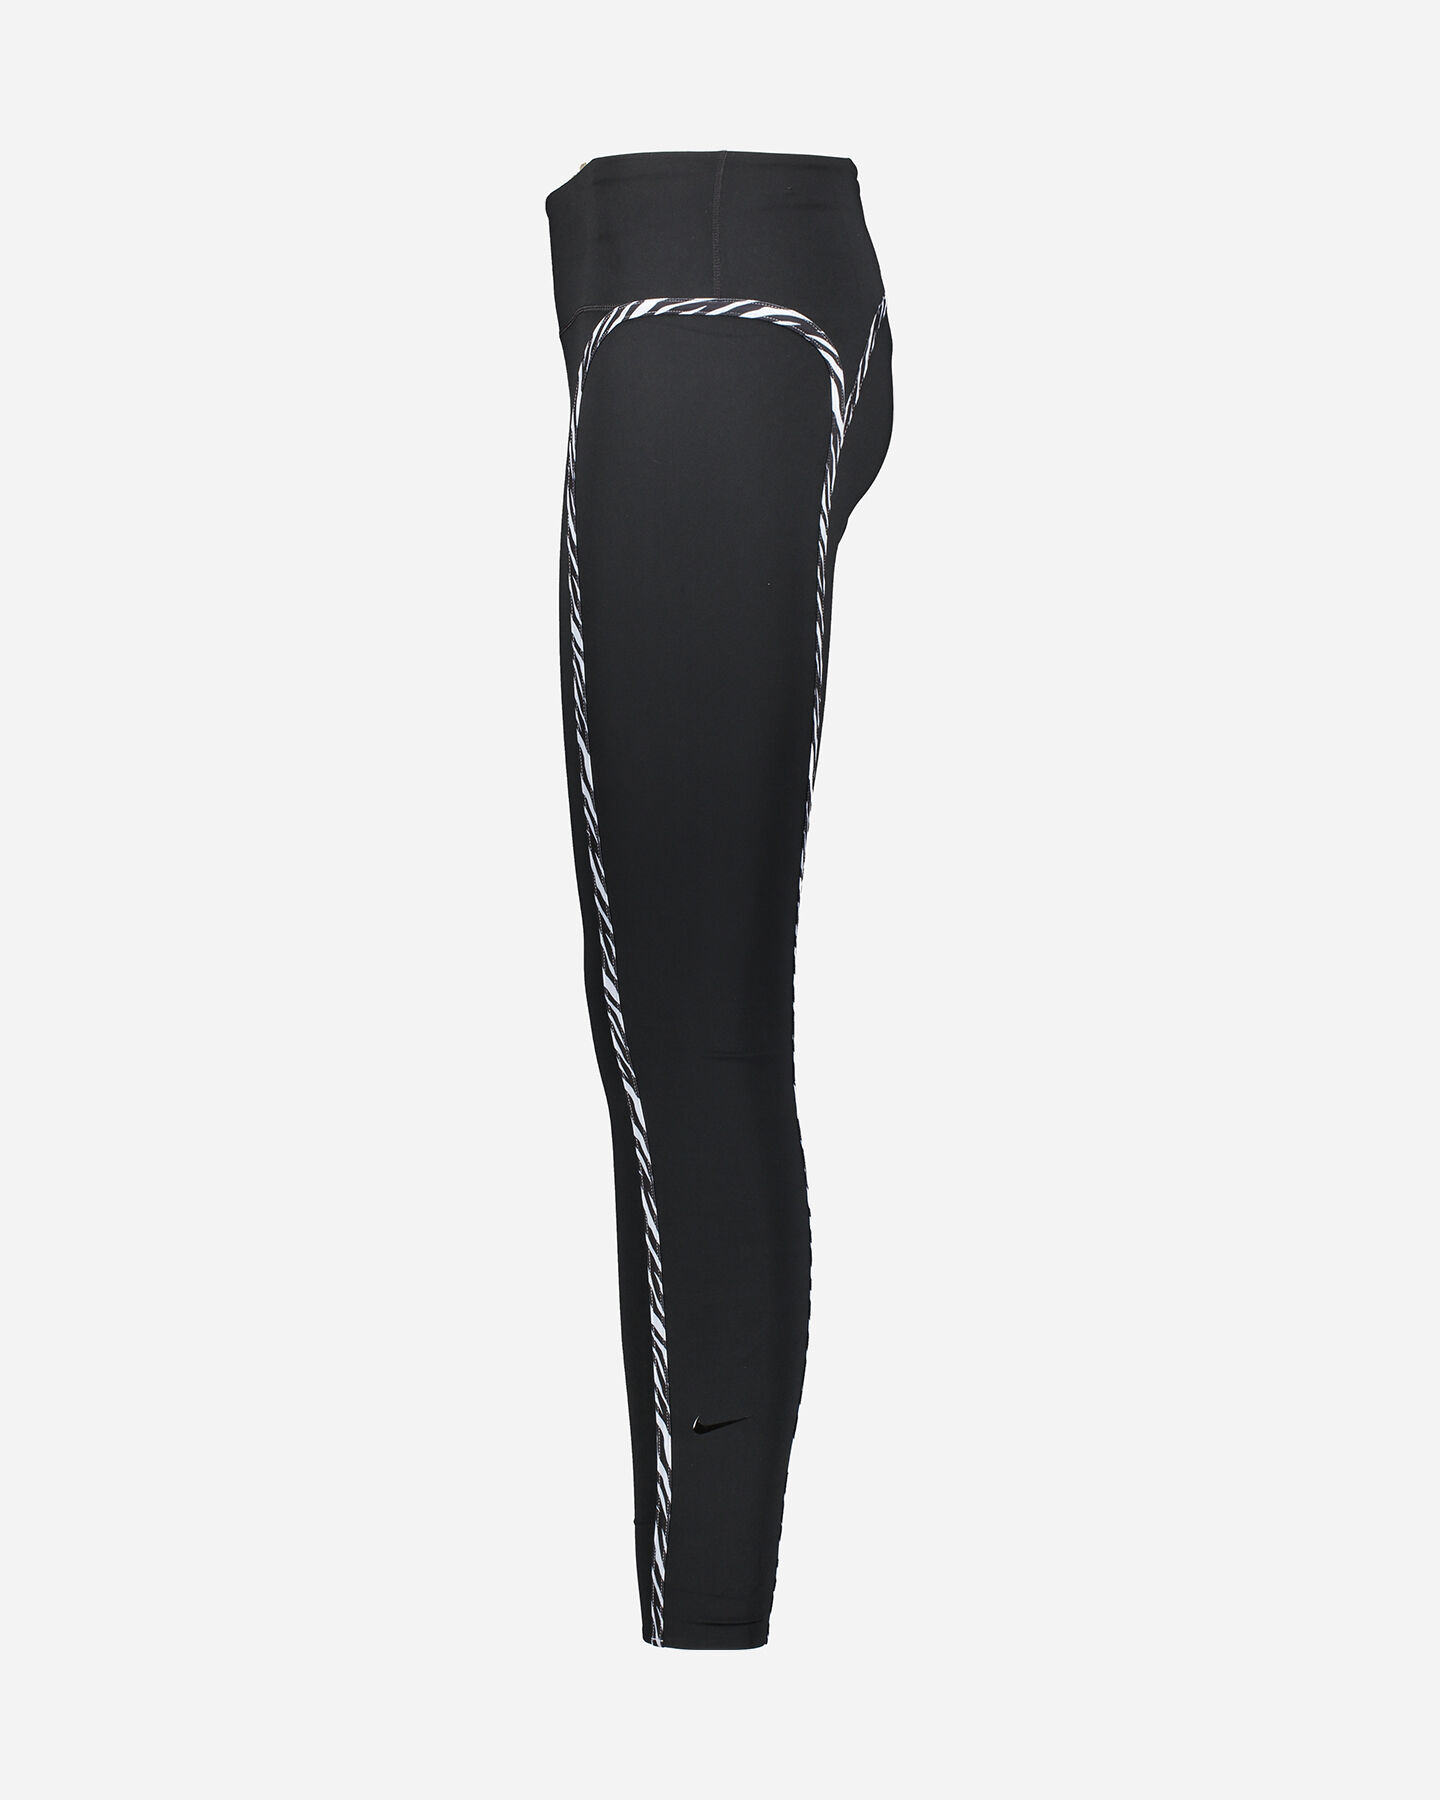  Leggings NIKE POLY ONE LUX W S5269826|010|XS scatto 1